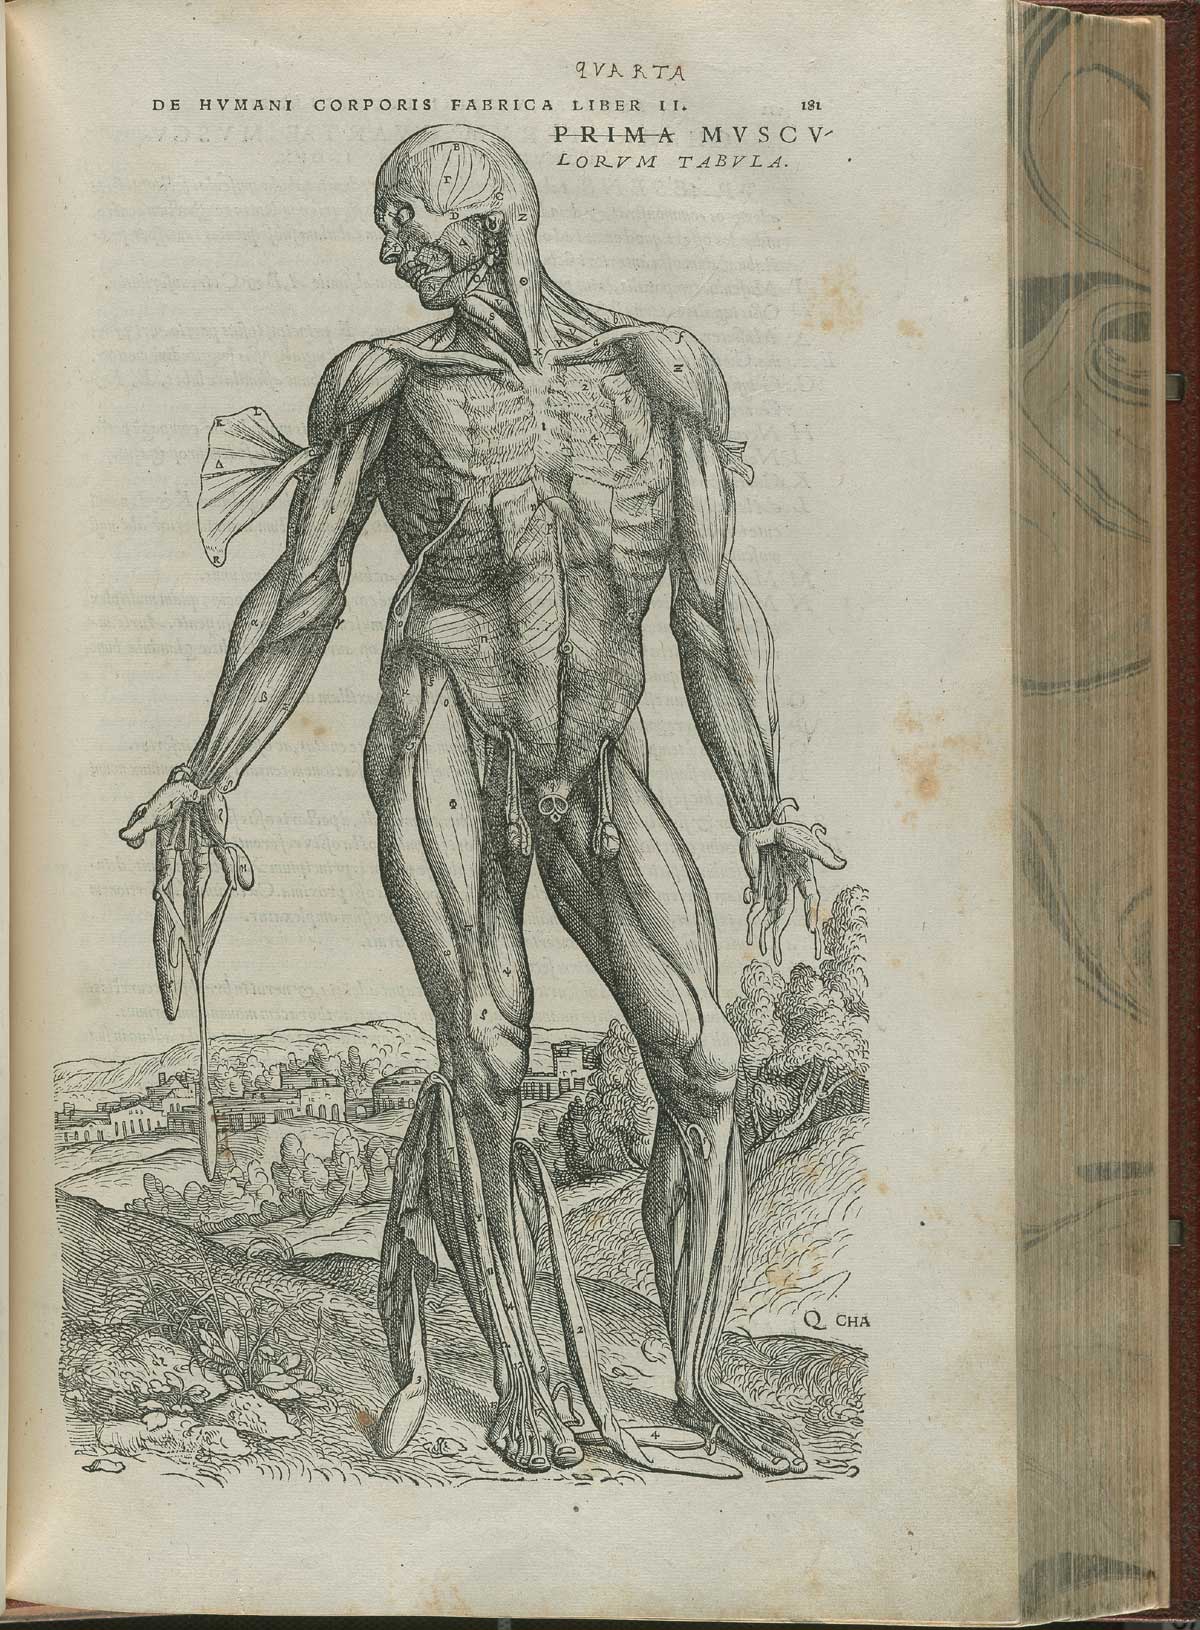 Page 181 of Andreas Vesalius' De corporis humani fabrica libri septem, featuring the illustrated woodcut of the fourth muscle plate, a full-length frontal view of a standing nude male in landscape. His skin is flayed, exposing his insides, and his head is facing the right.